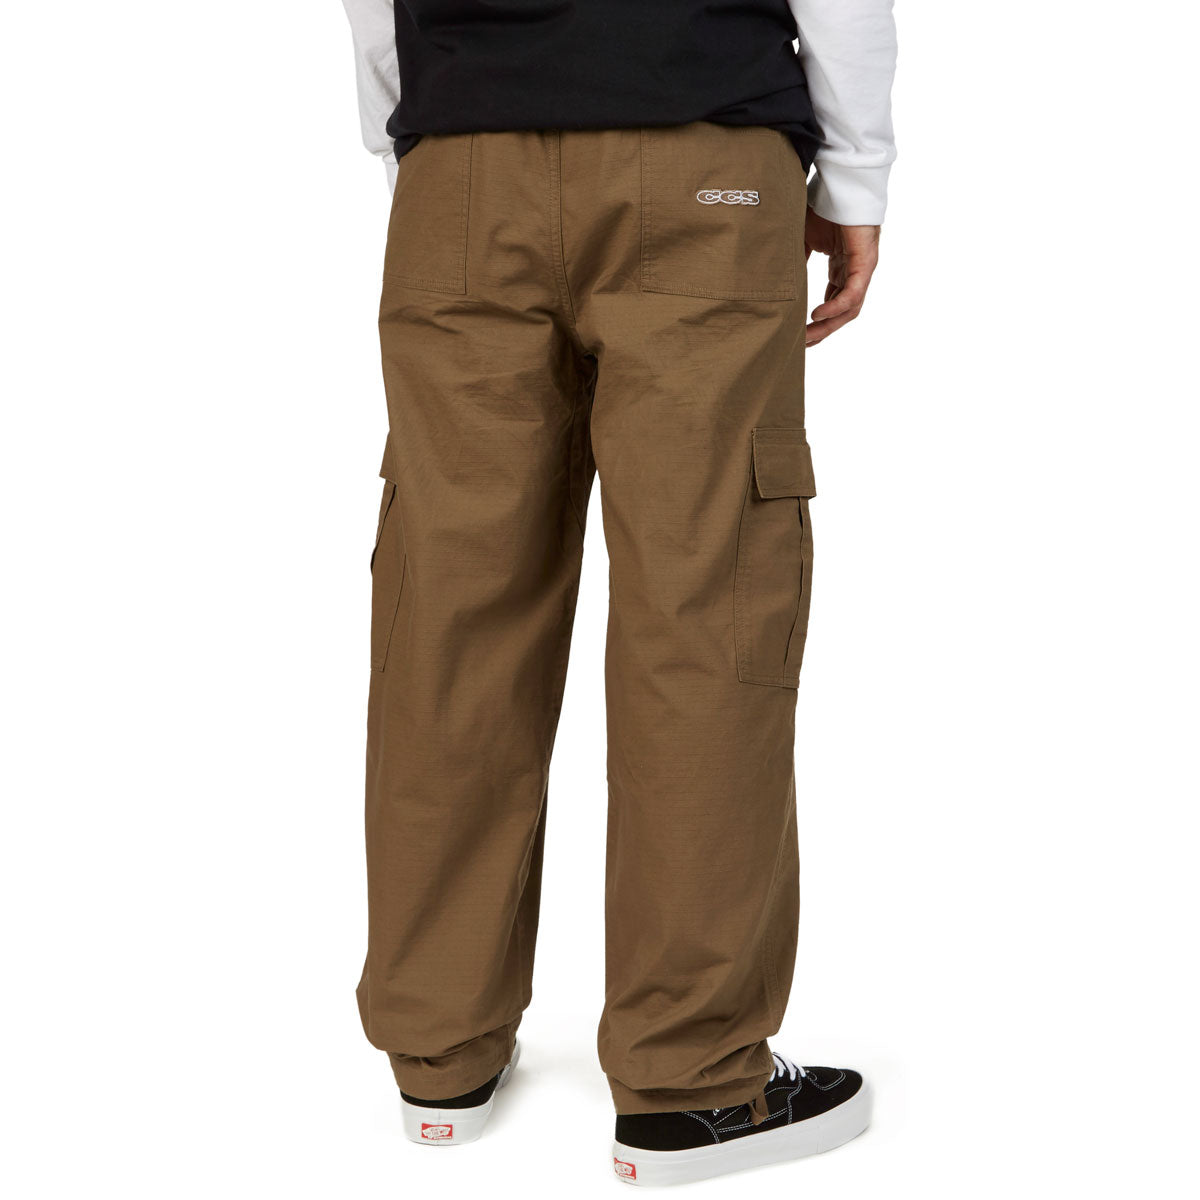 CCS Easy Ripstop Cargo Pants - Brown image 3